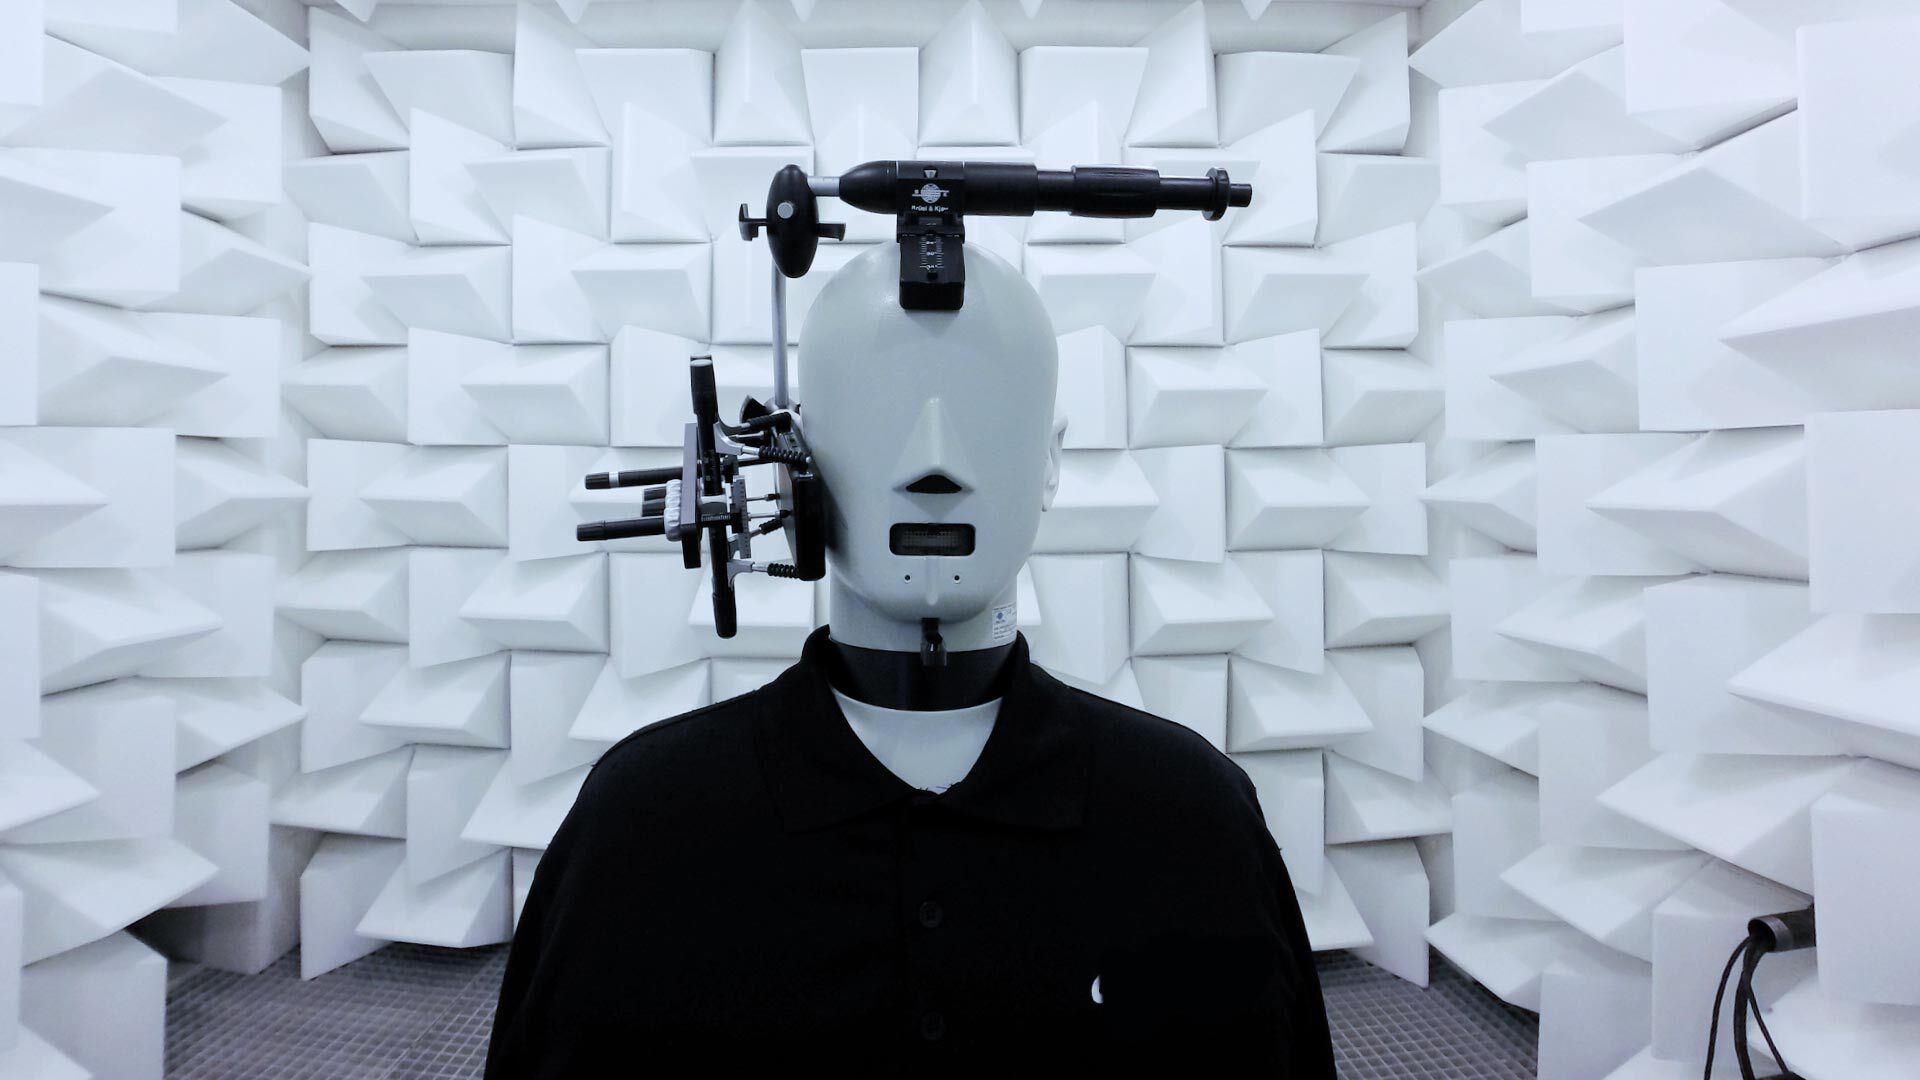 Head and torso simulator (short: HATS), which is used to conduct audio tests